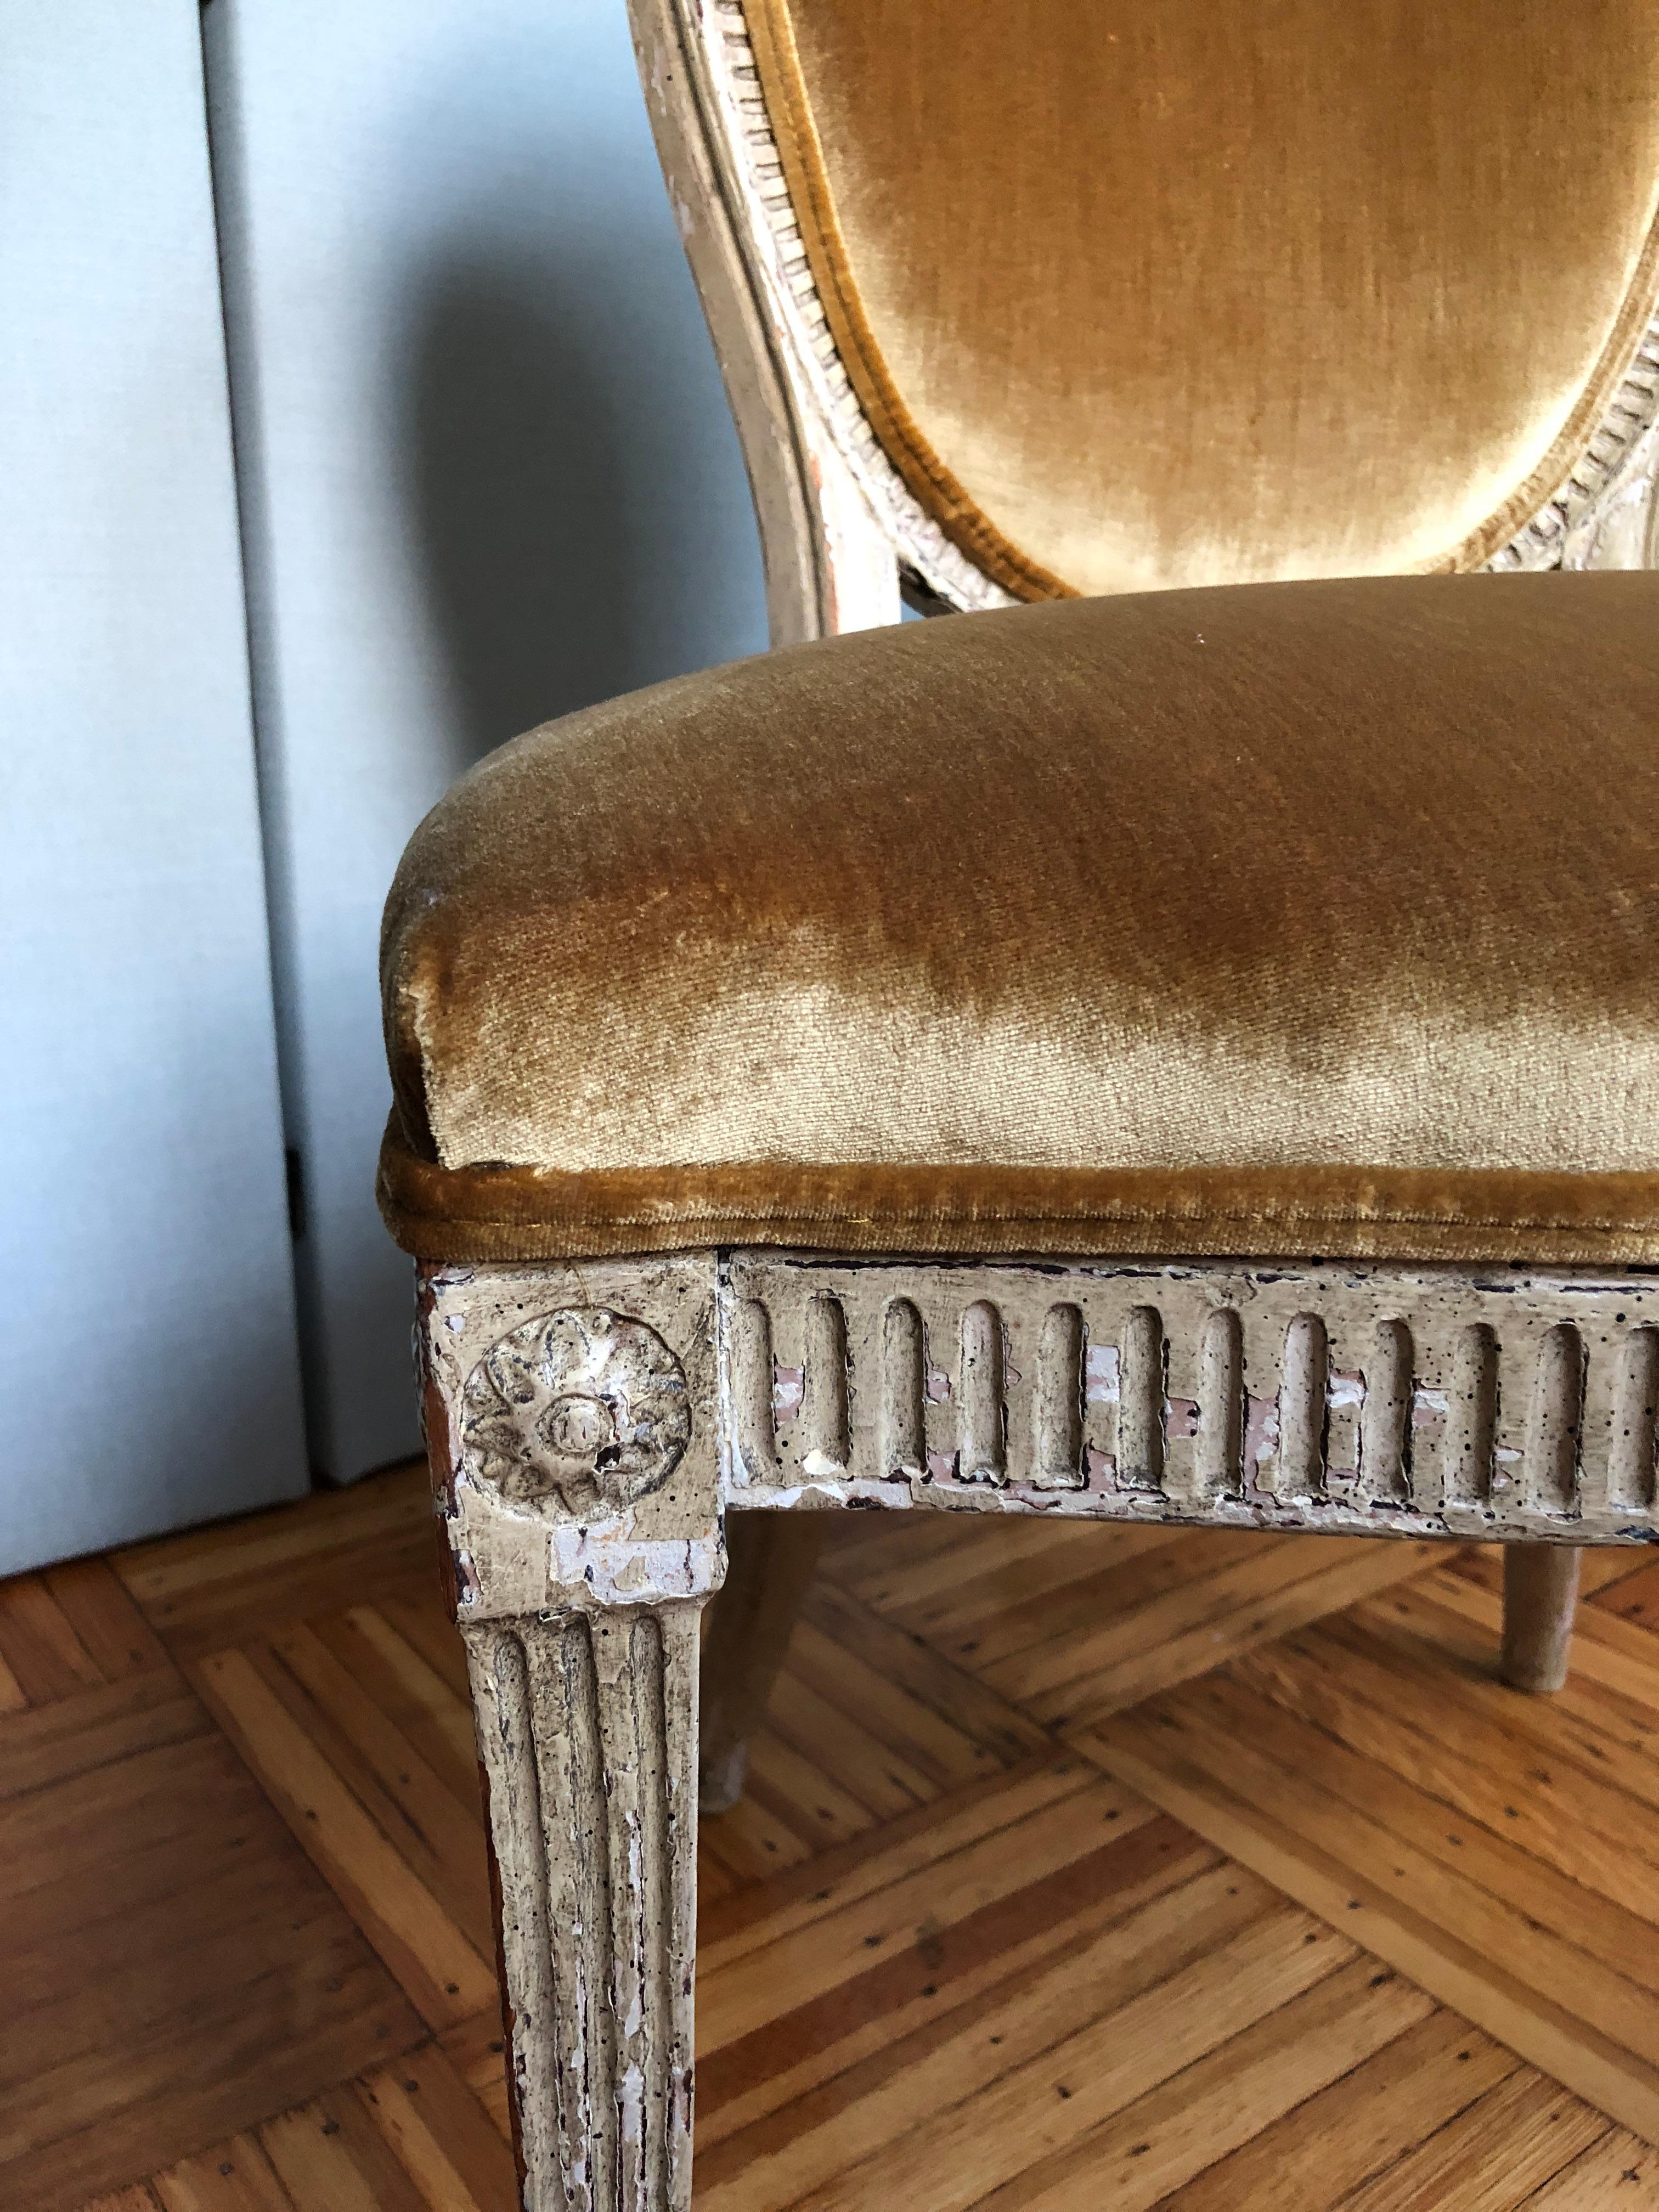 Showroom antique condition with patina on velvet and frame. Year unknown, though irregular carvings and layers of paint suggest handcrafting and antique age. Fluted carved legs with rosettes. Very comfortable curved back support. Reinforced for